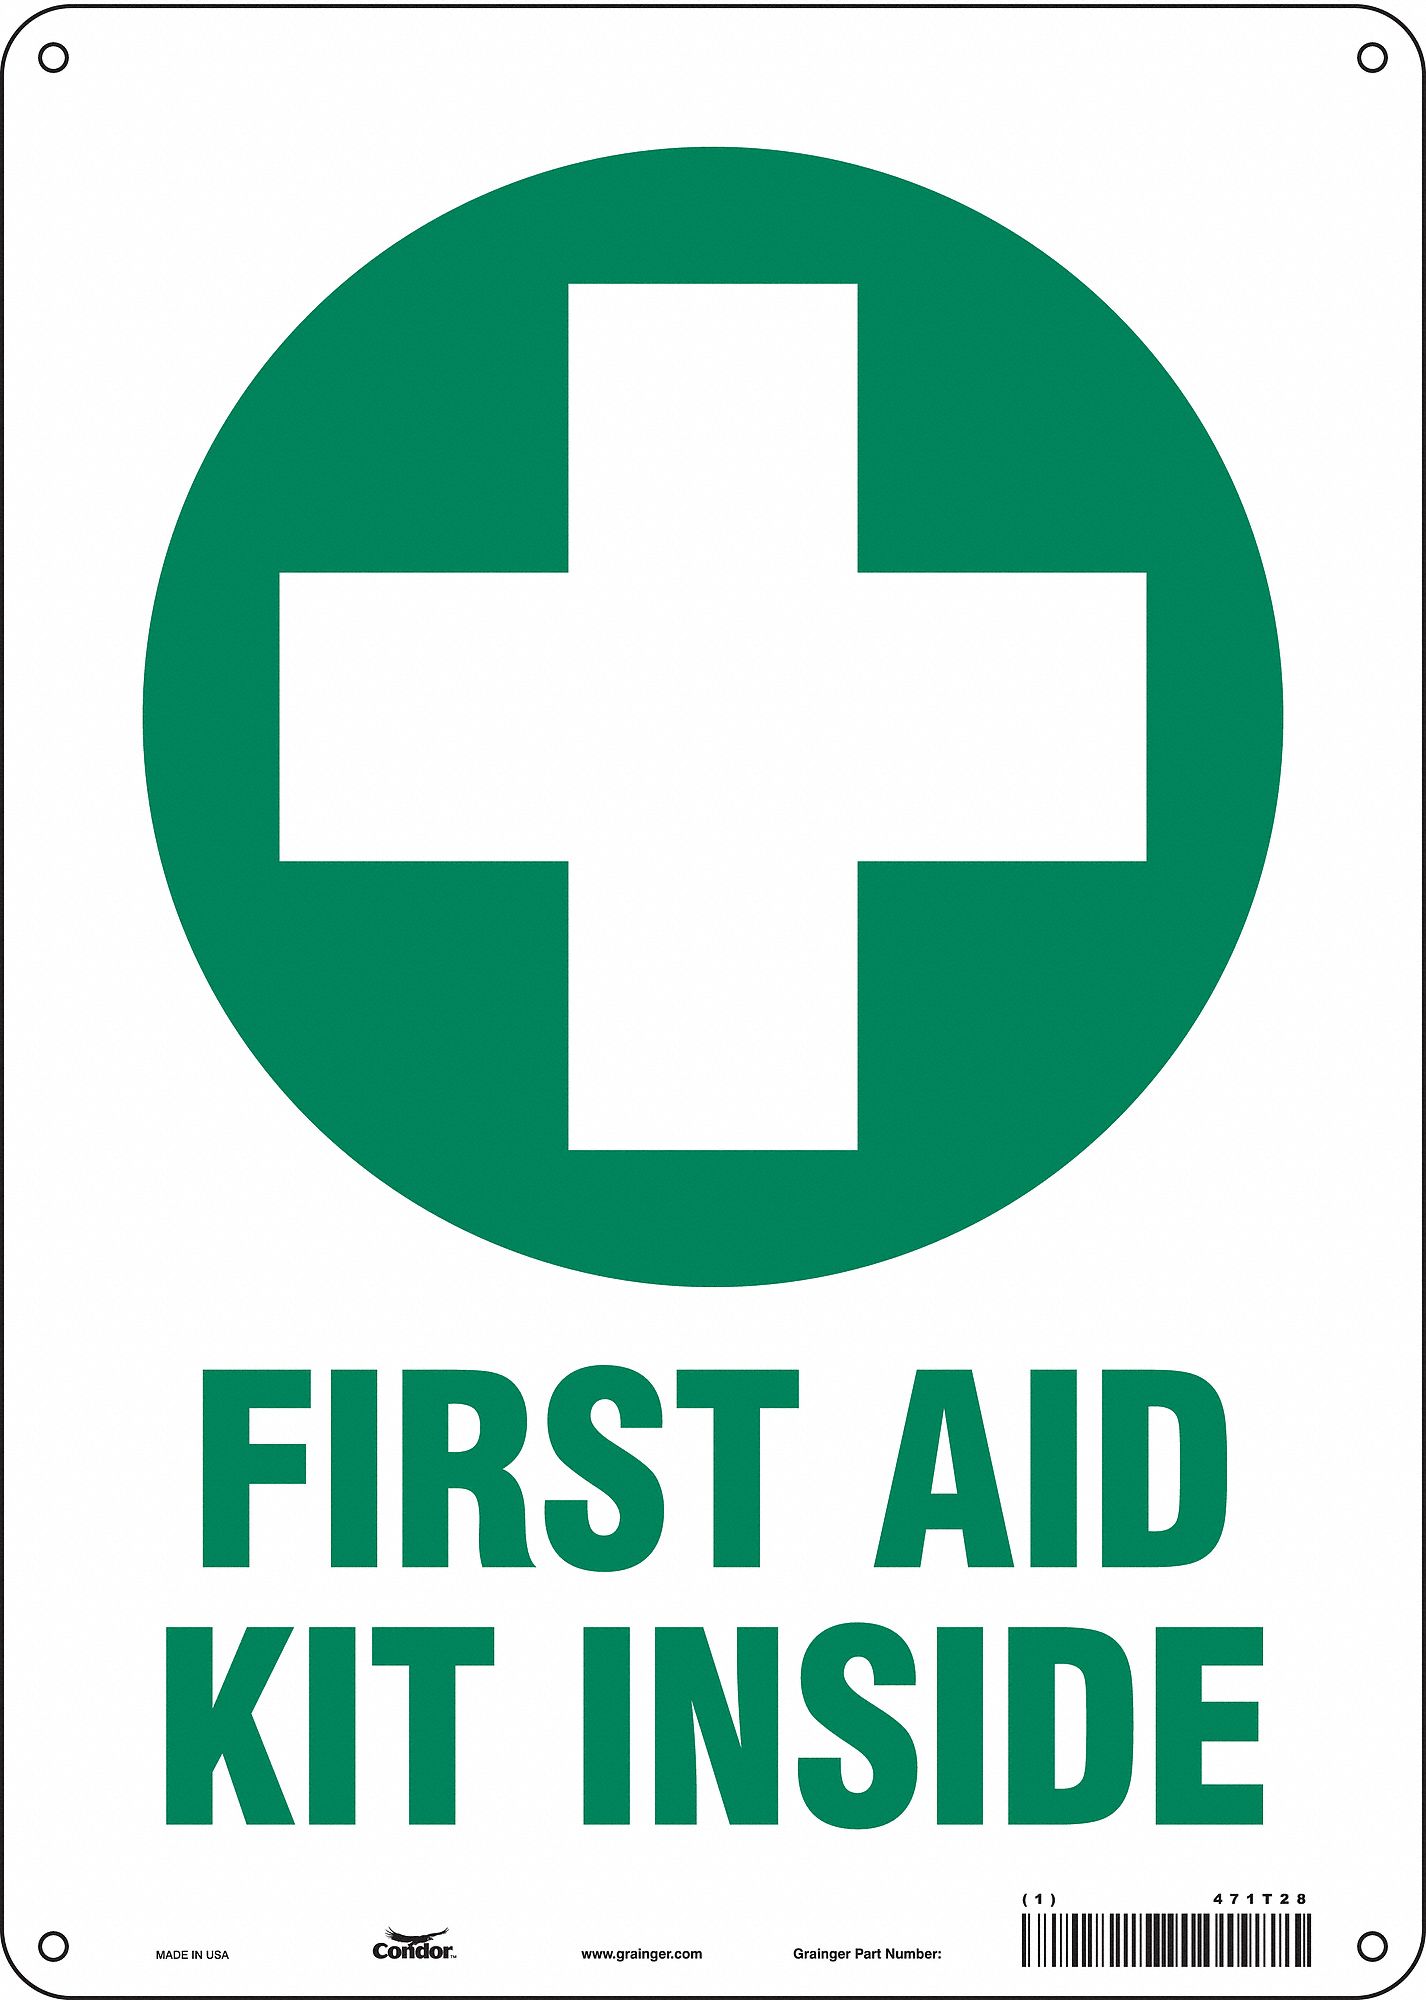 First Aid Kit Inside Safety Sign